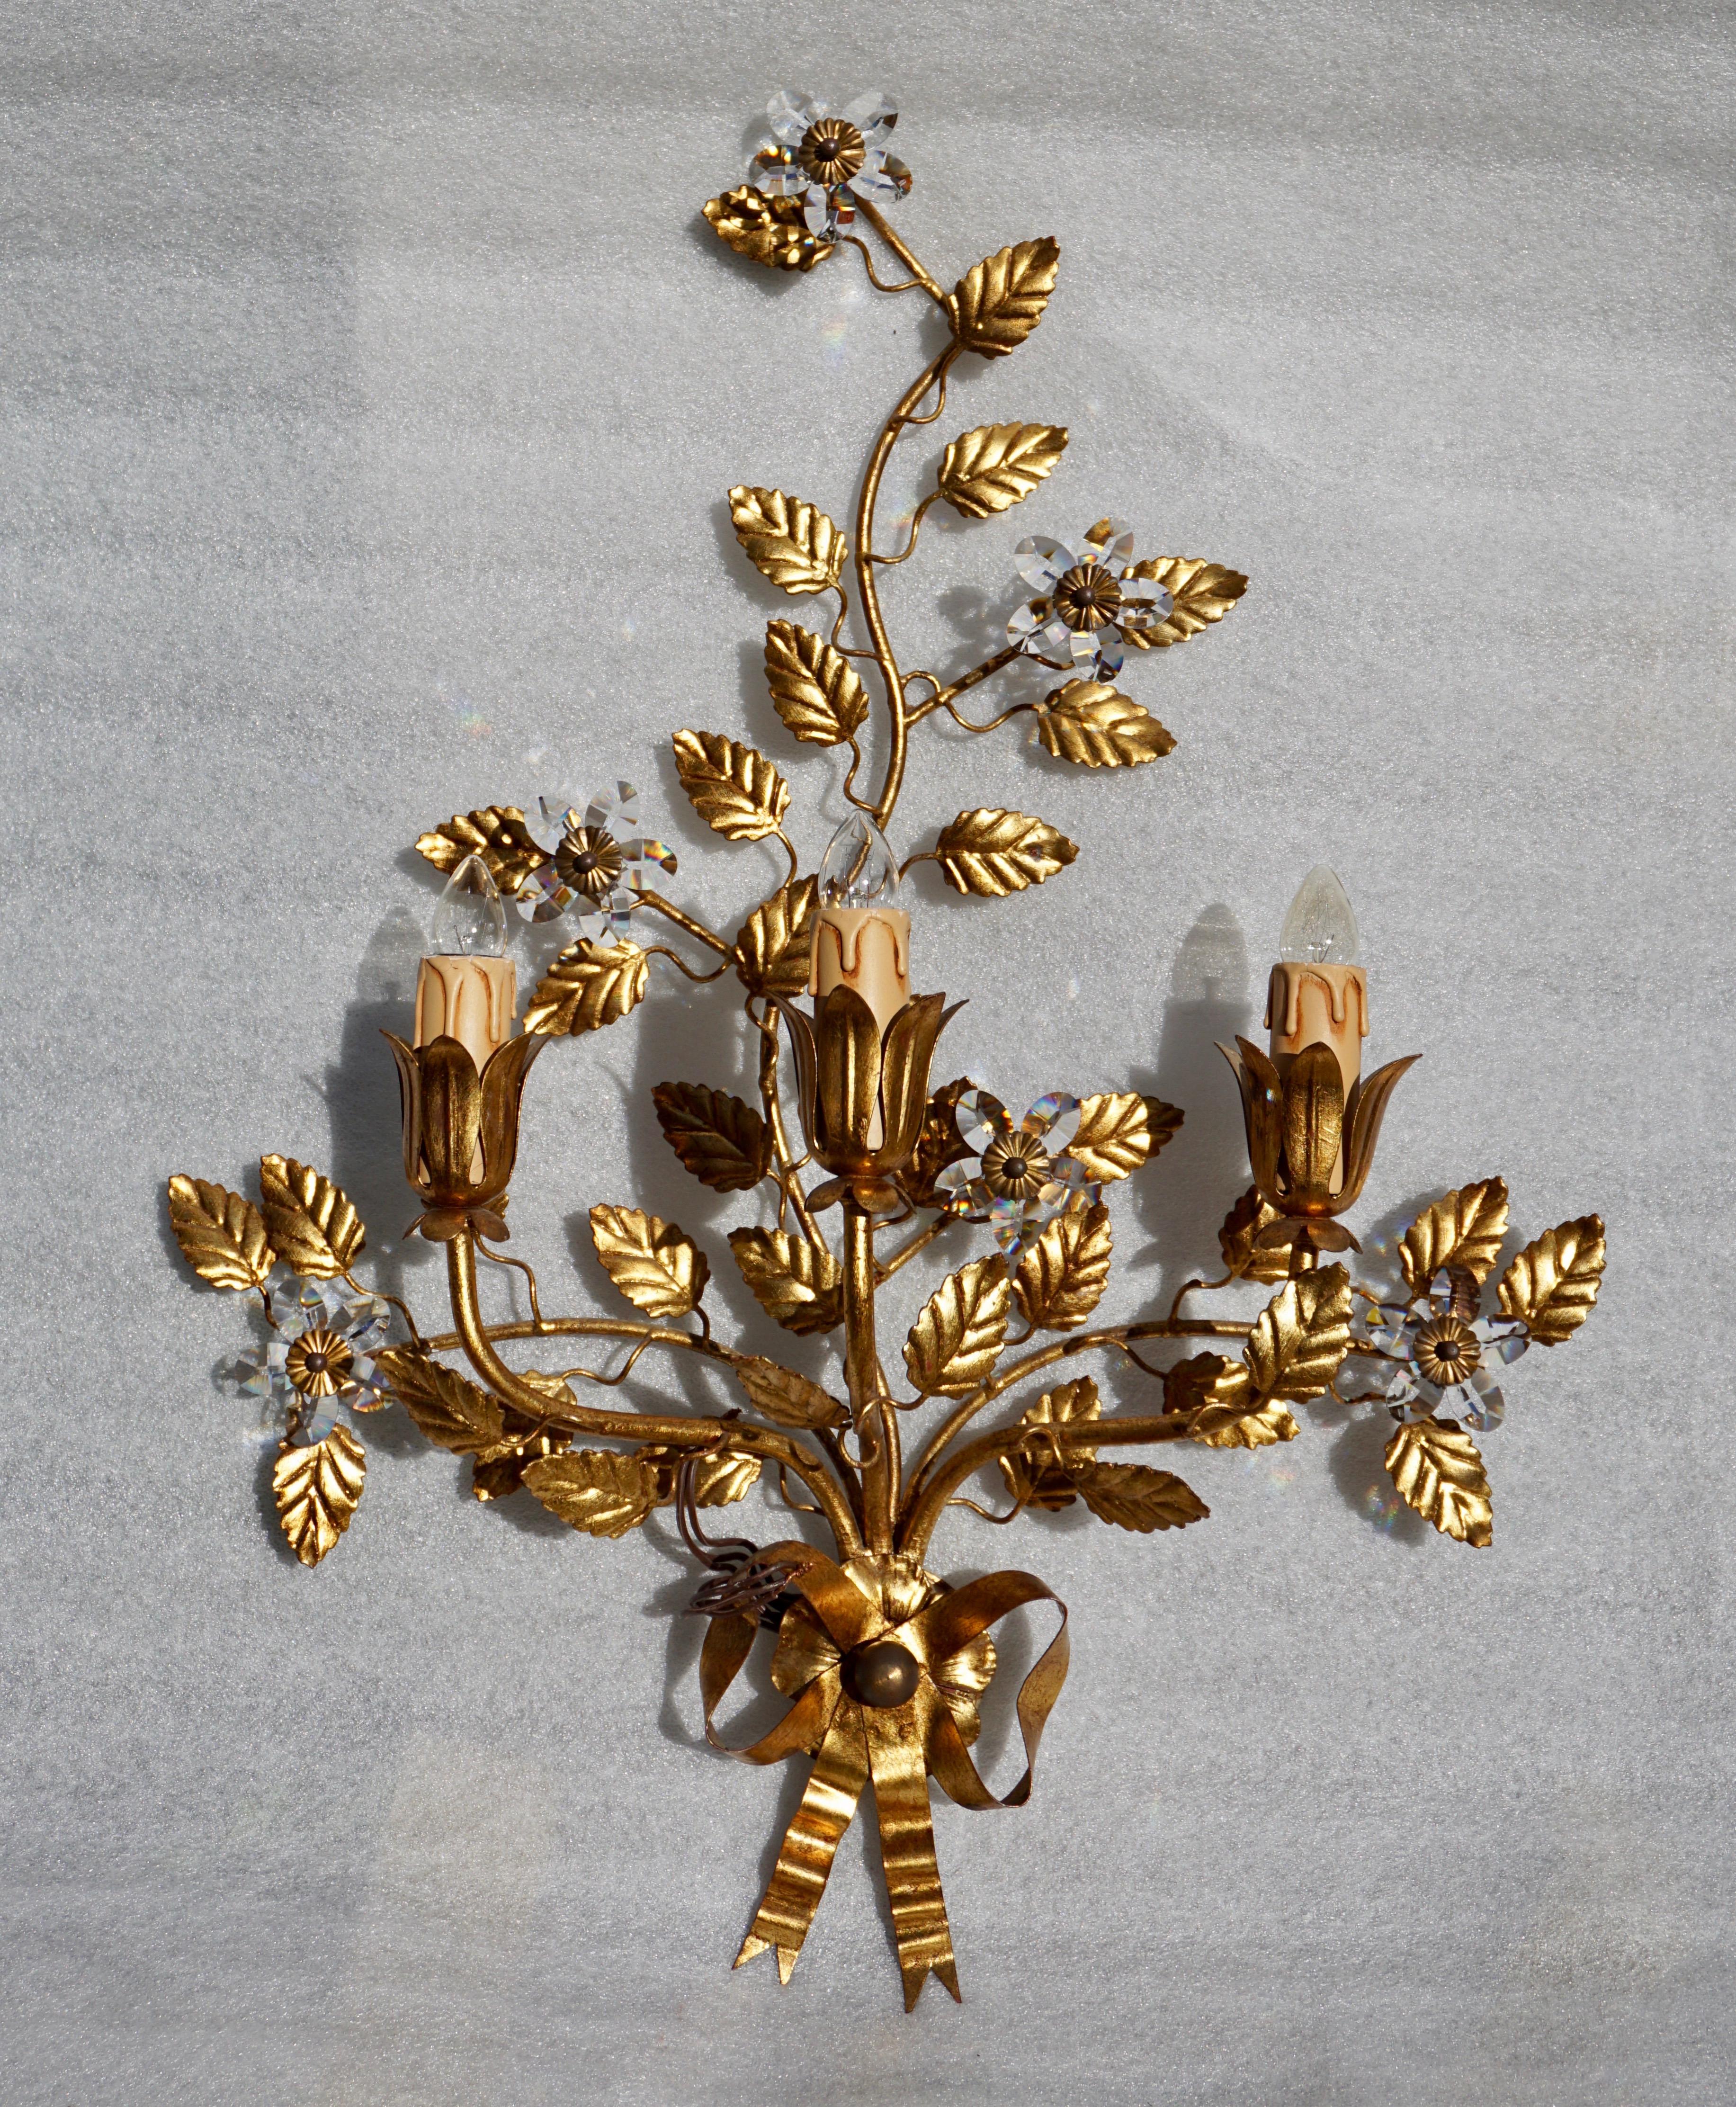 Brass gilded sconce with crystal flowers. Italy.
Measures: Height 60 cm.
Width 45 cm.
Depth 17 cm.
Tree E14 bulbs.
 